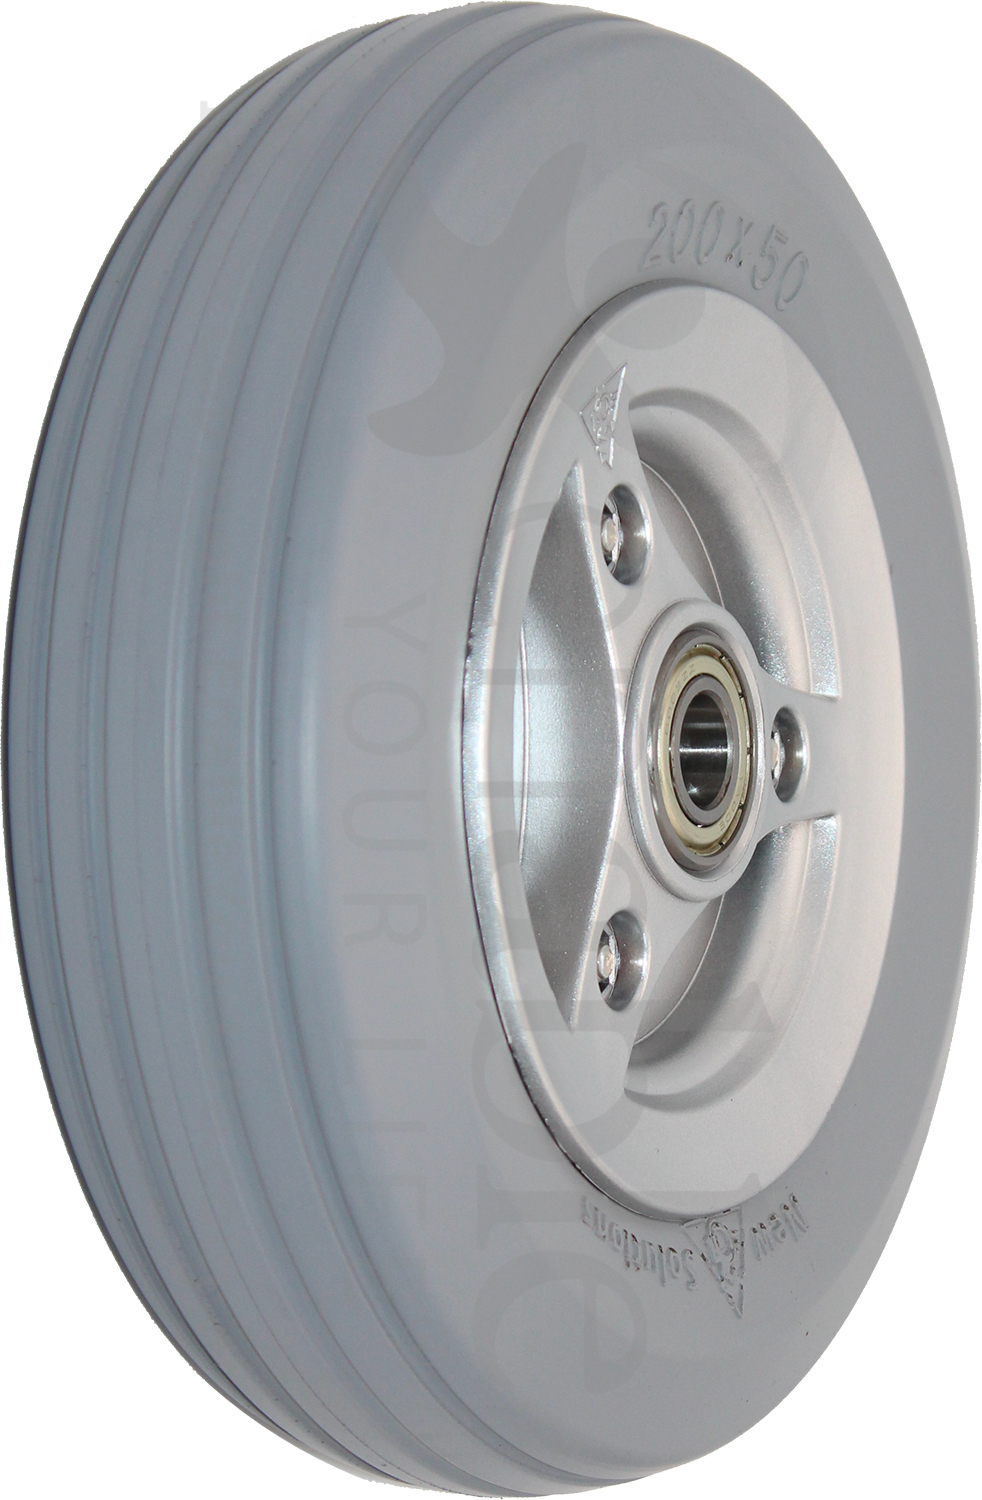 8 x 2 in. (200 x 50) Permobil M300, M300HD, and M400 Replacement Wheelchair Caster Wheel with Light Gray Tire (Compare to Permobil Part 1826508) - Angled view shown